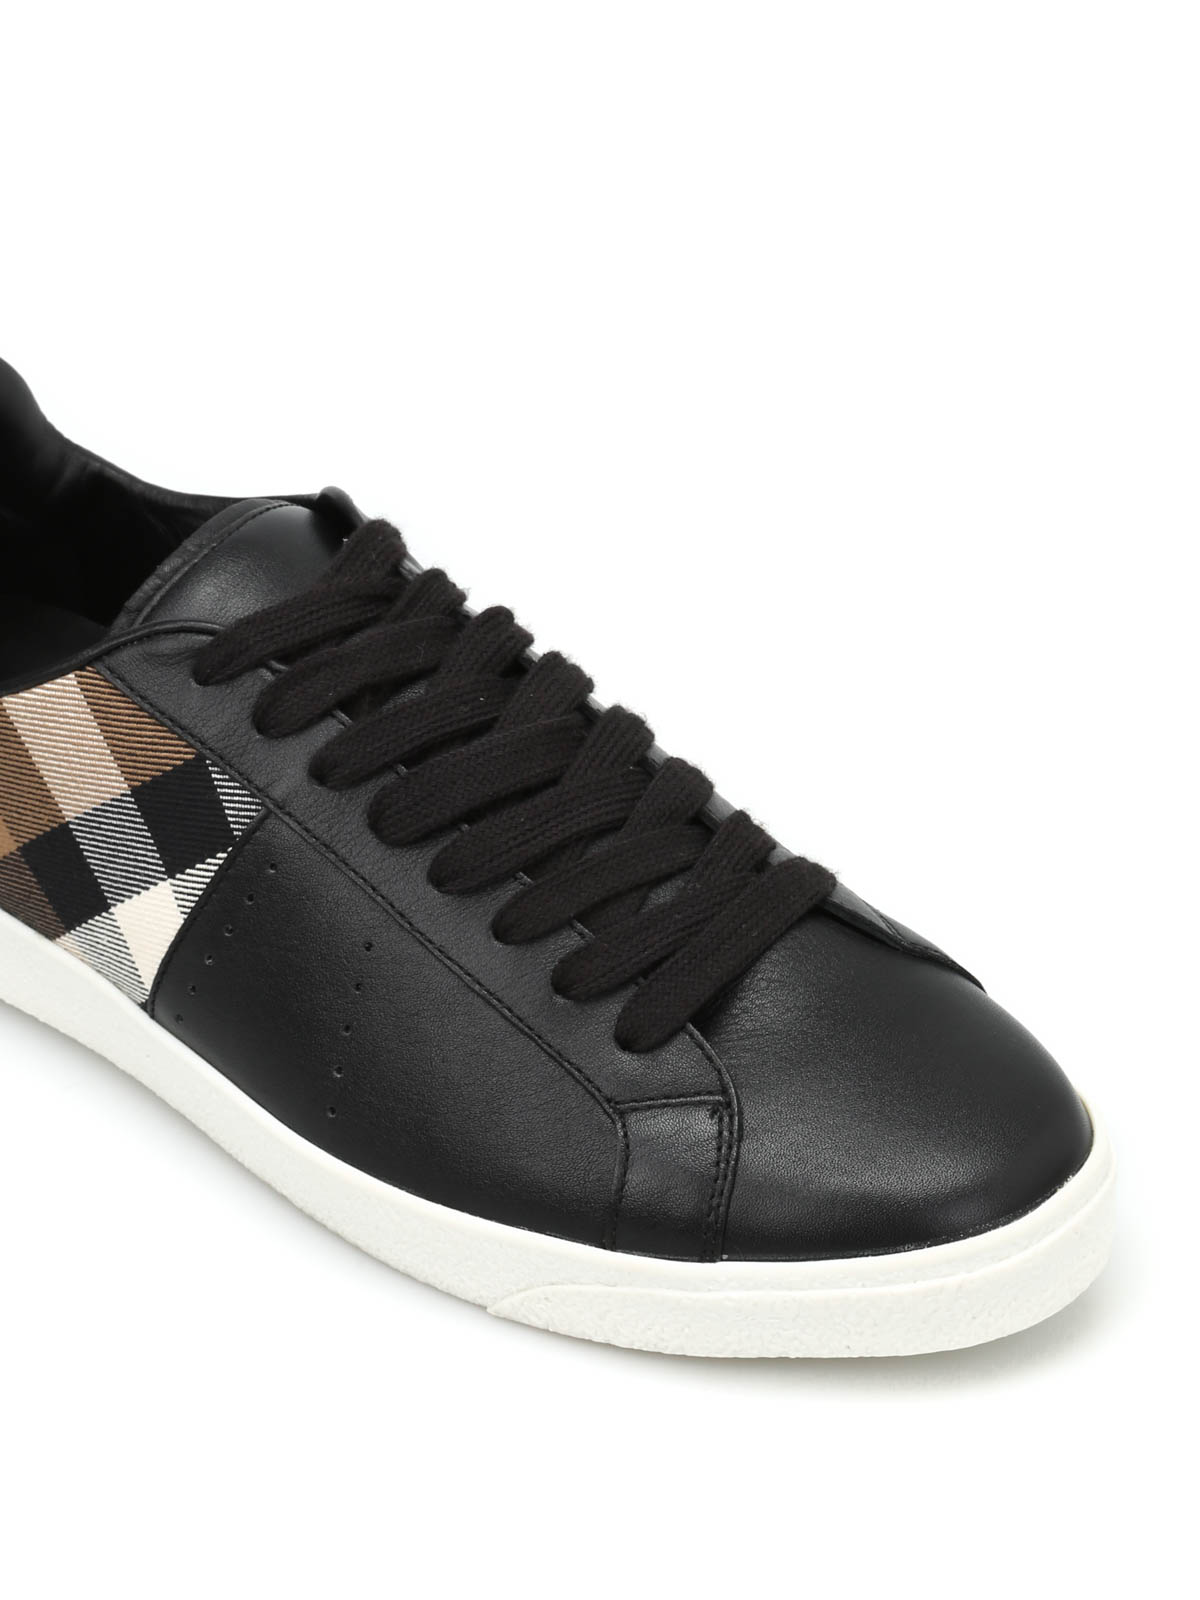 burberry leather and house check sneakers